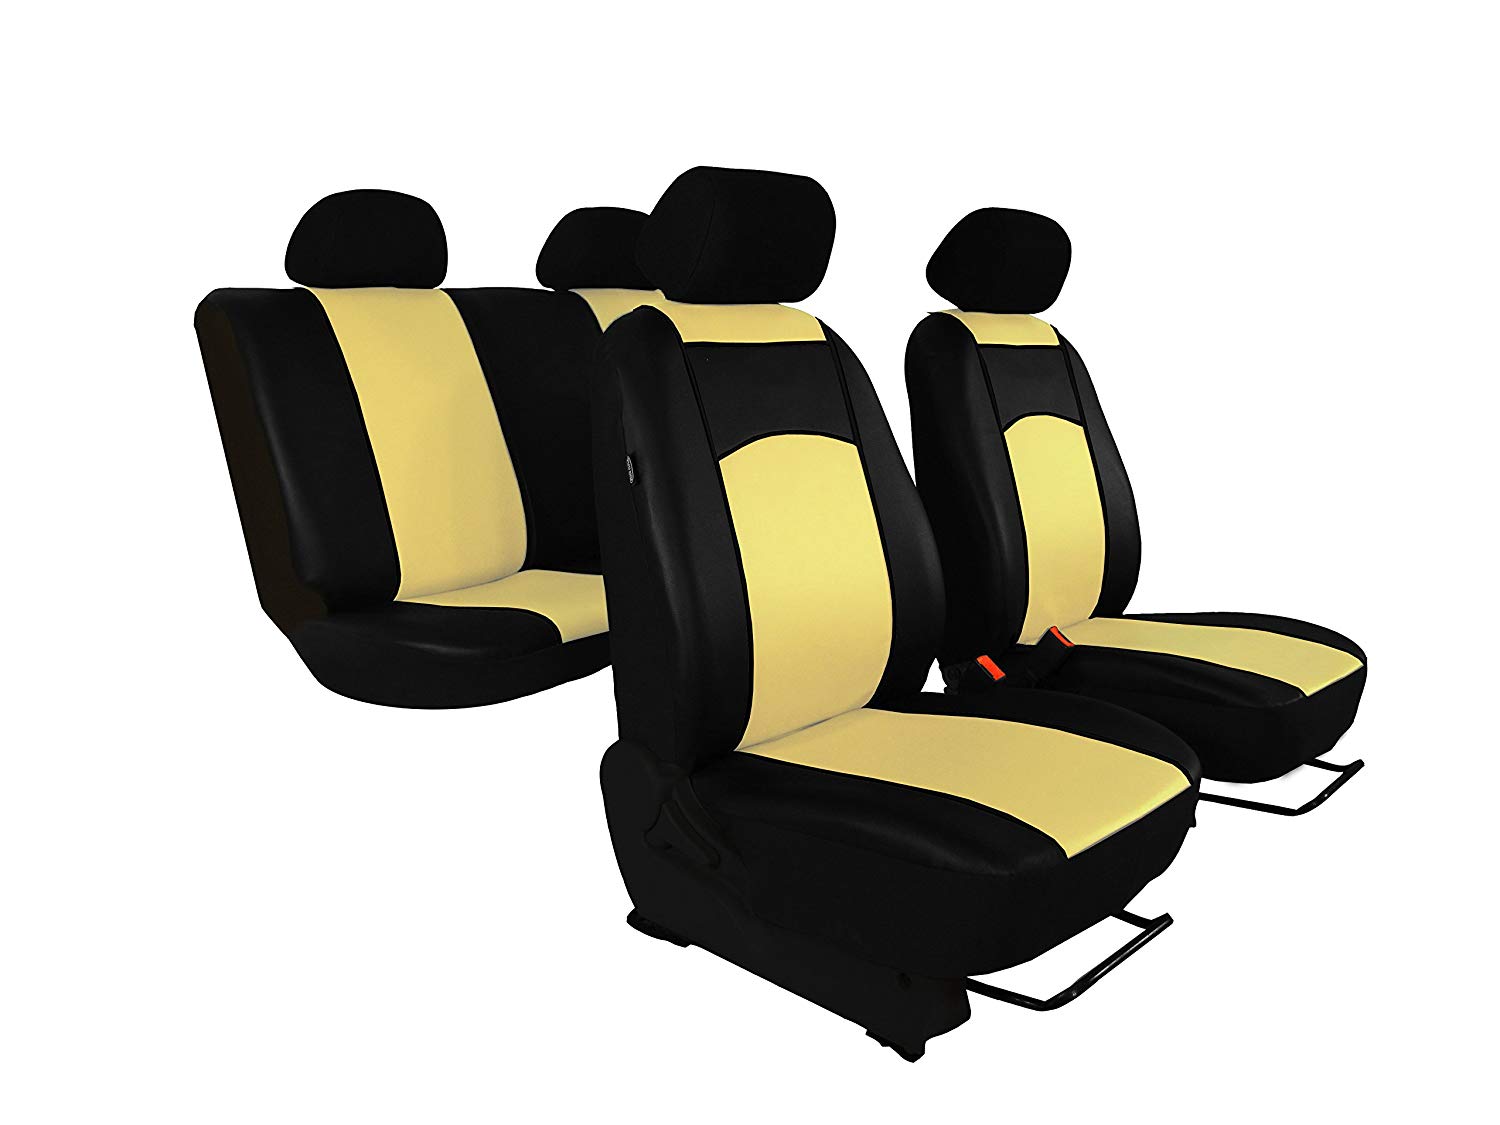 POK-TER-TUNING For B-Class W246 2011-2018, high-quality, custom-fit seat covers, protective covers, faux leather, 7 colours